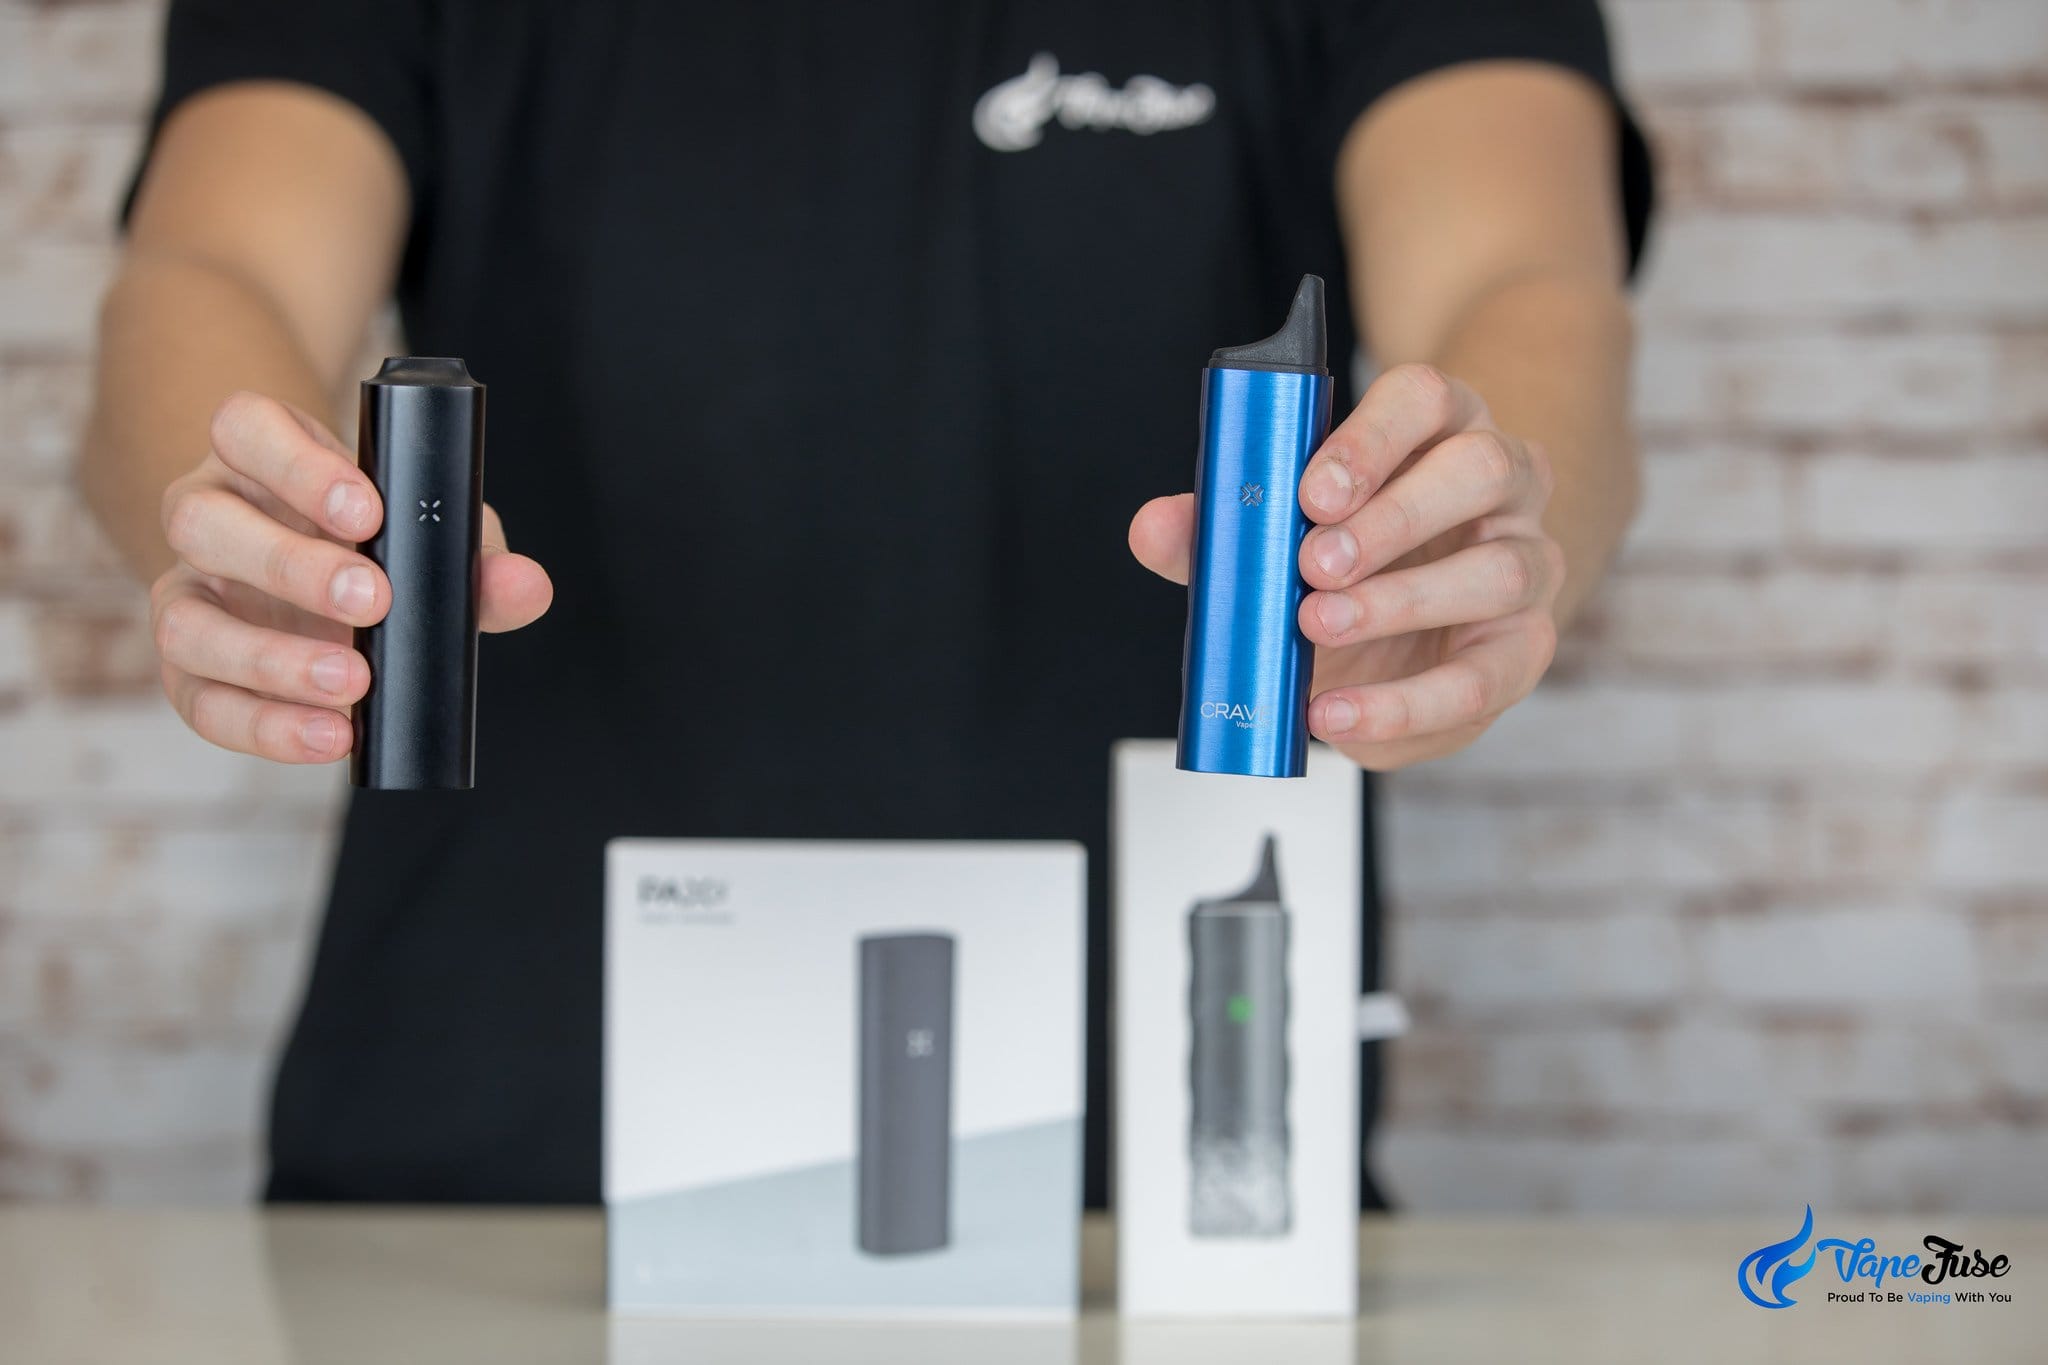 Crave Air vs PAX3: Which One's for You?